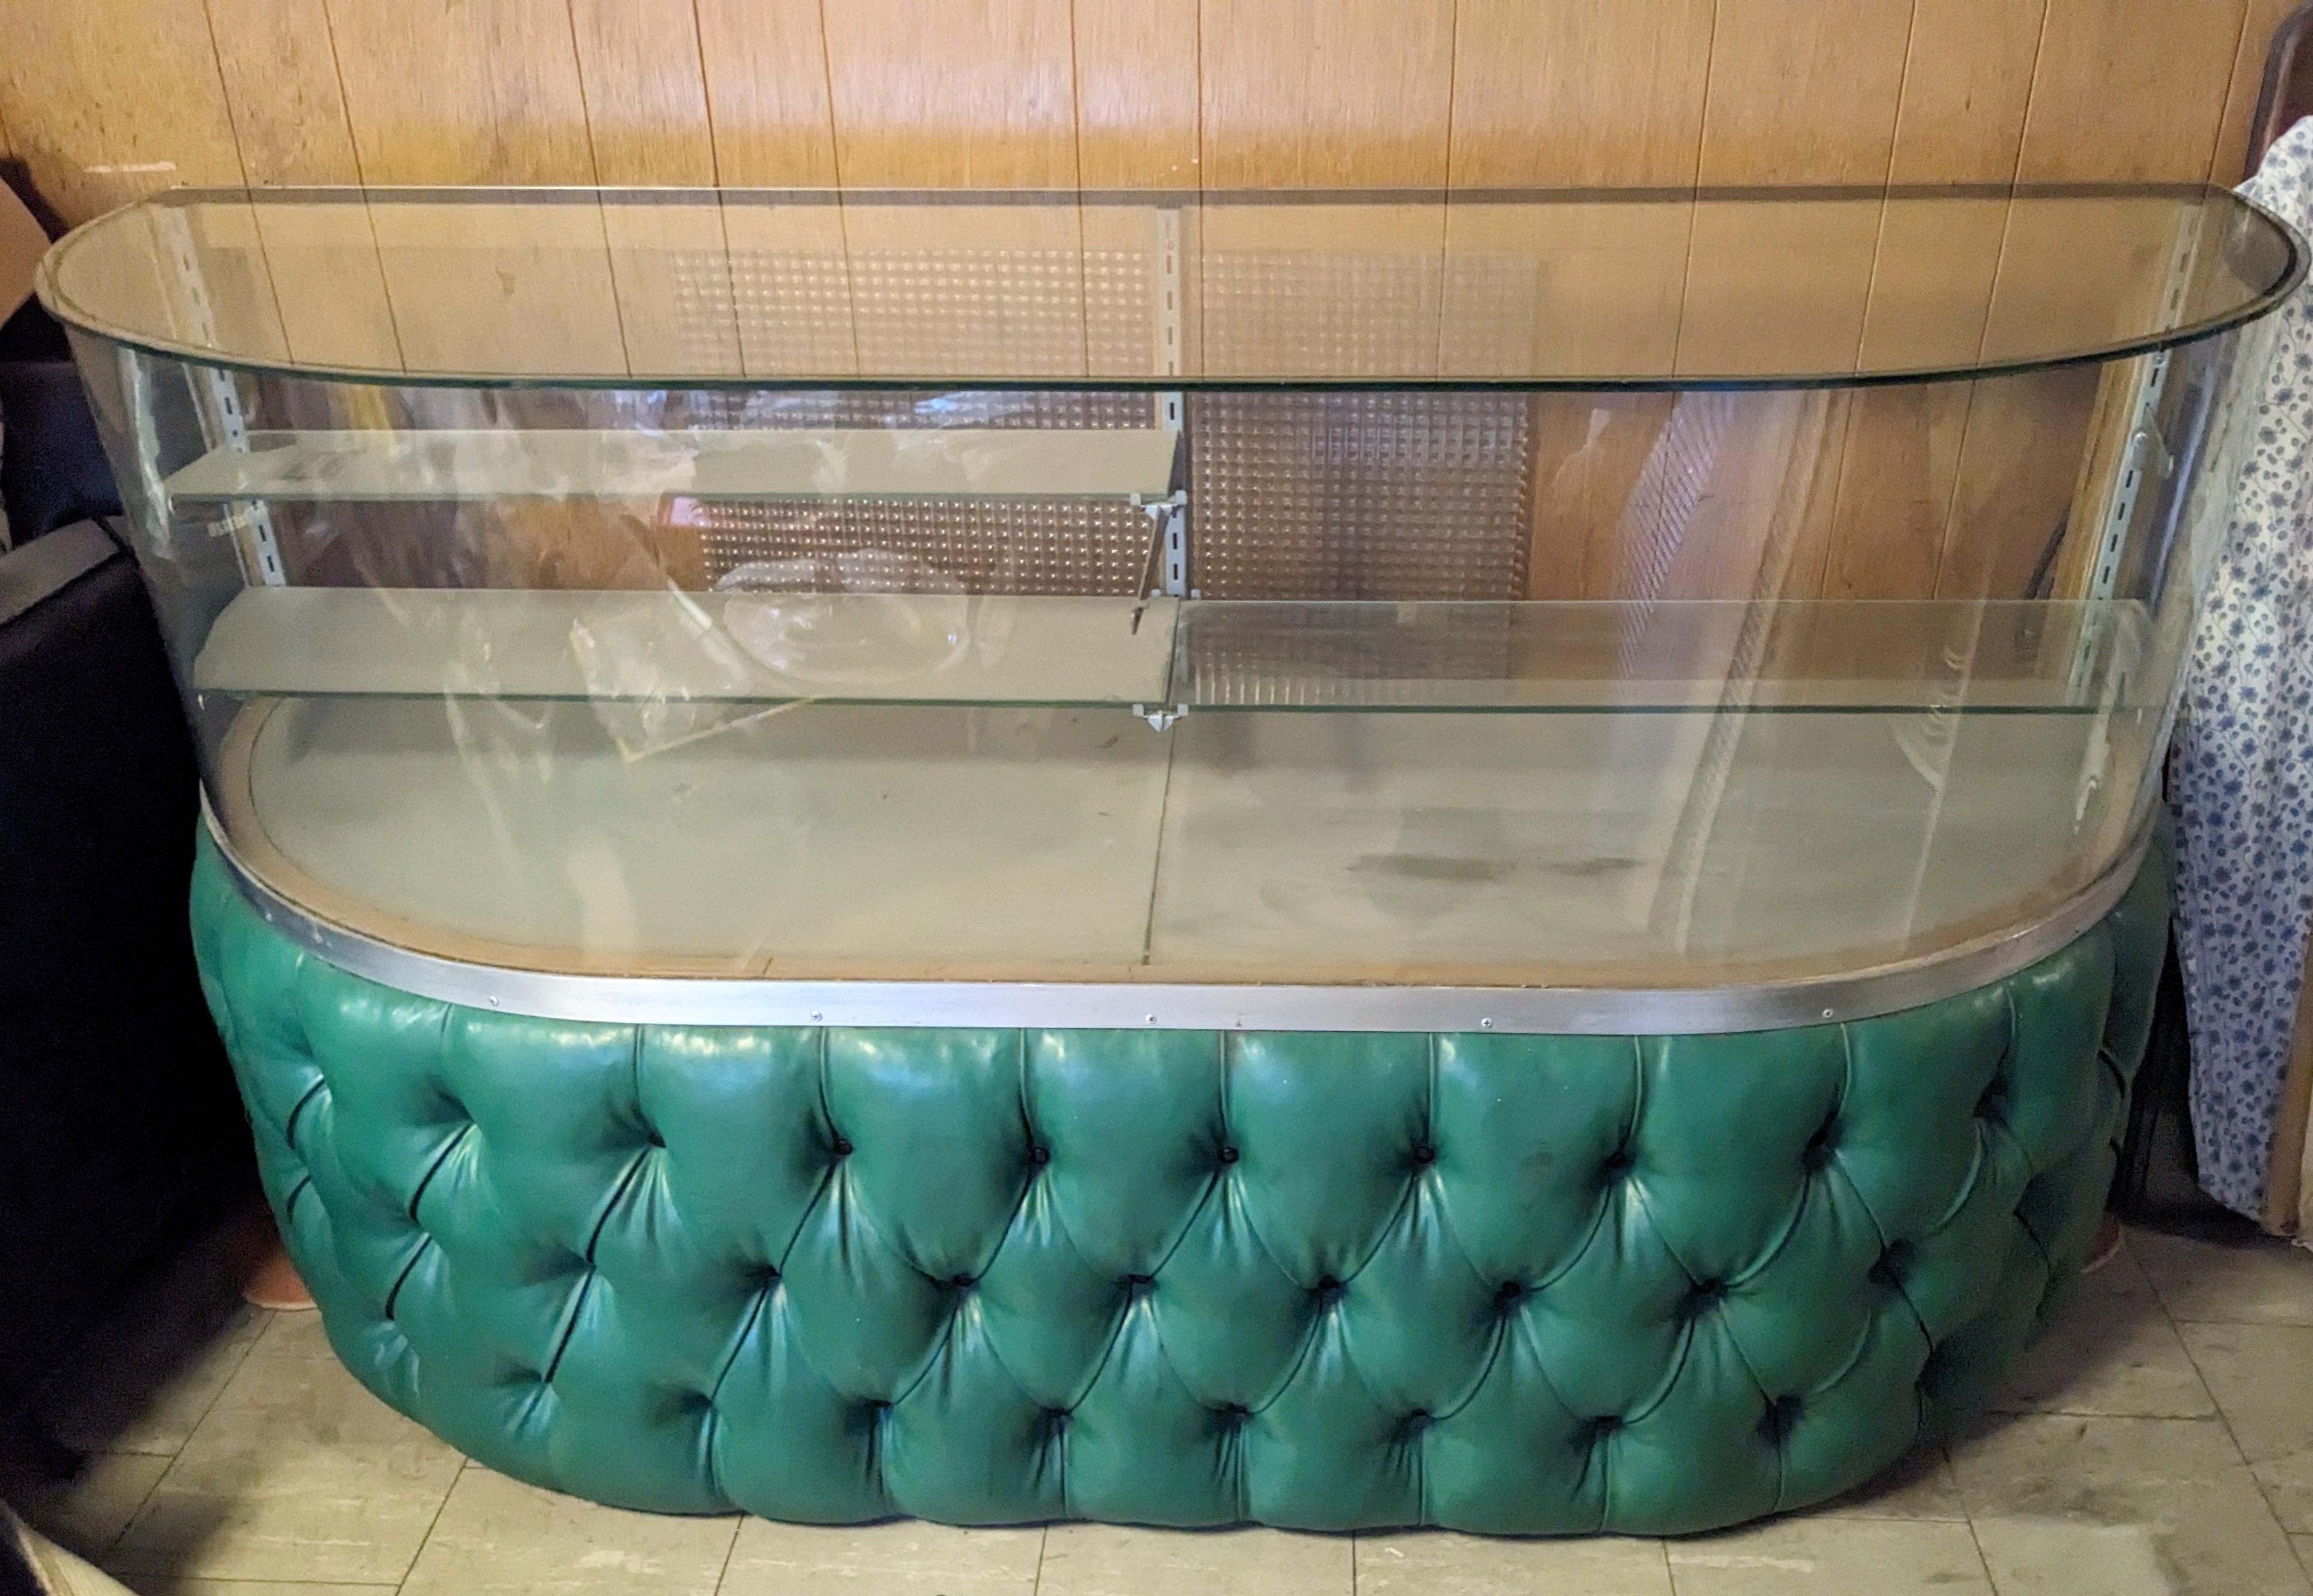 Iconic Mid Century Curved Vitrine Showcase with tufted Naugahyde base circa 1940-1950 of American origin. Vitrine has storage behind/below the 1950's green tufted vinyl with its original waffle glass sliding doors.
Showcase also has a switch to